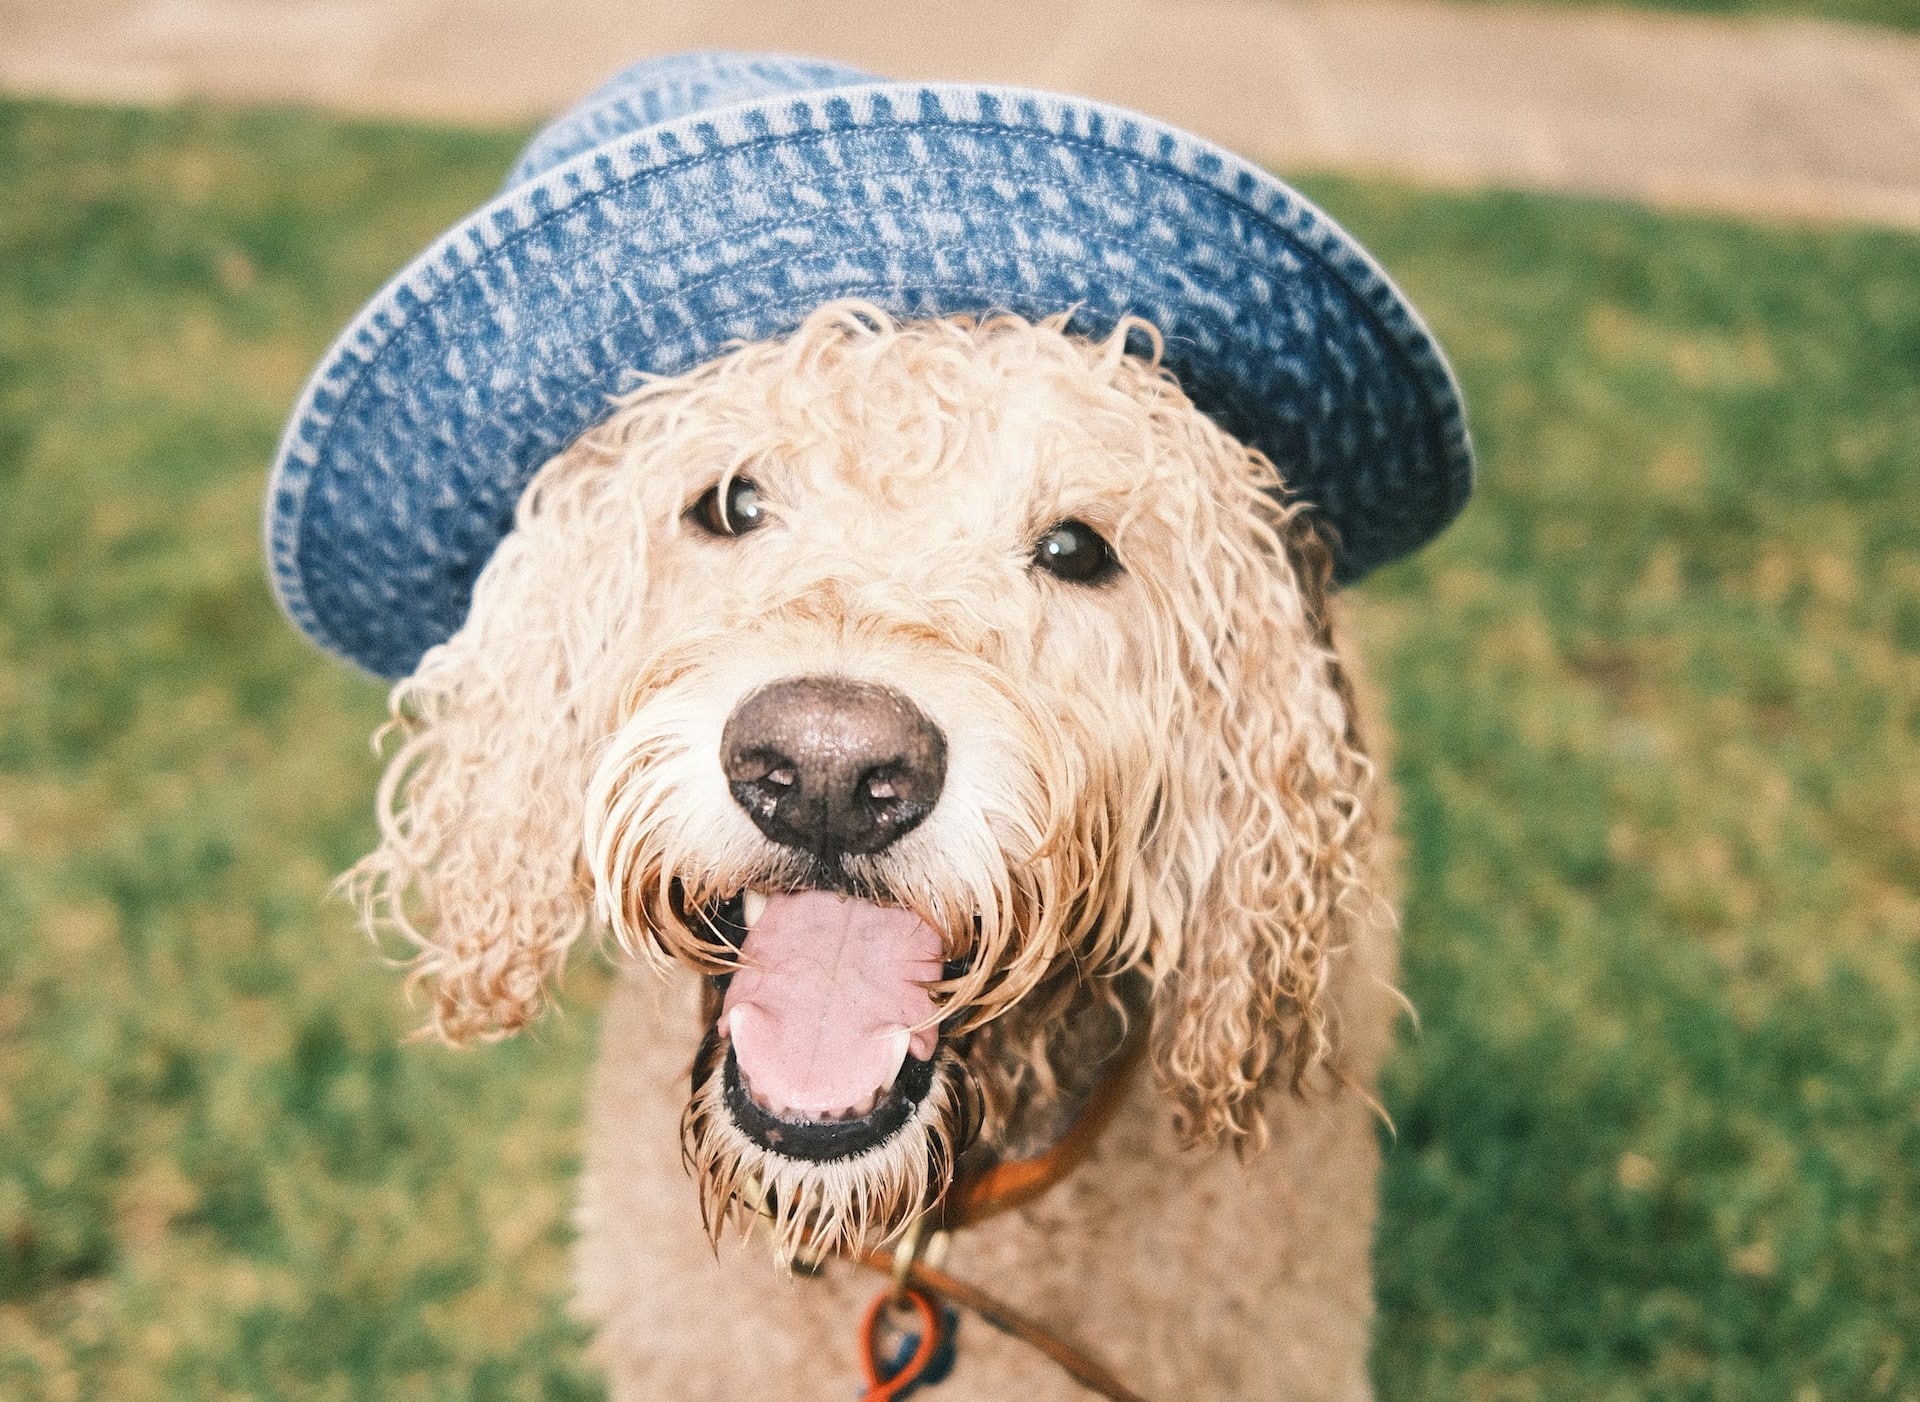 A groodle dog wears a hat